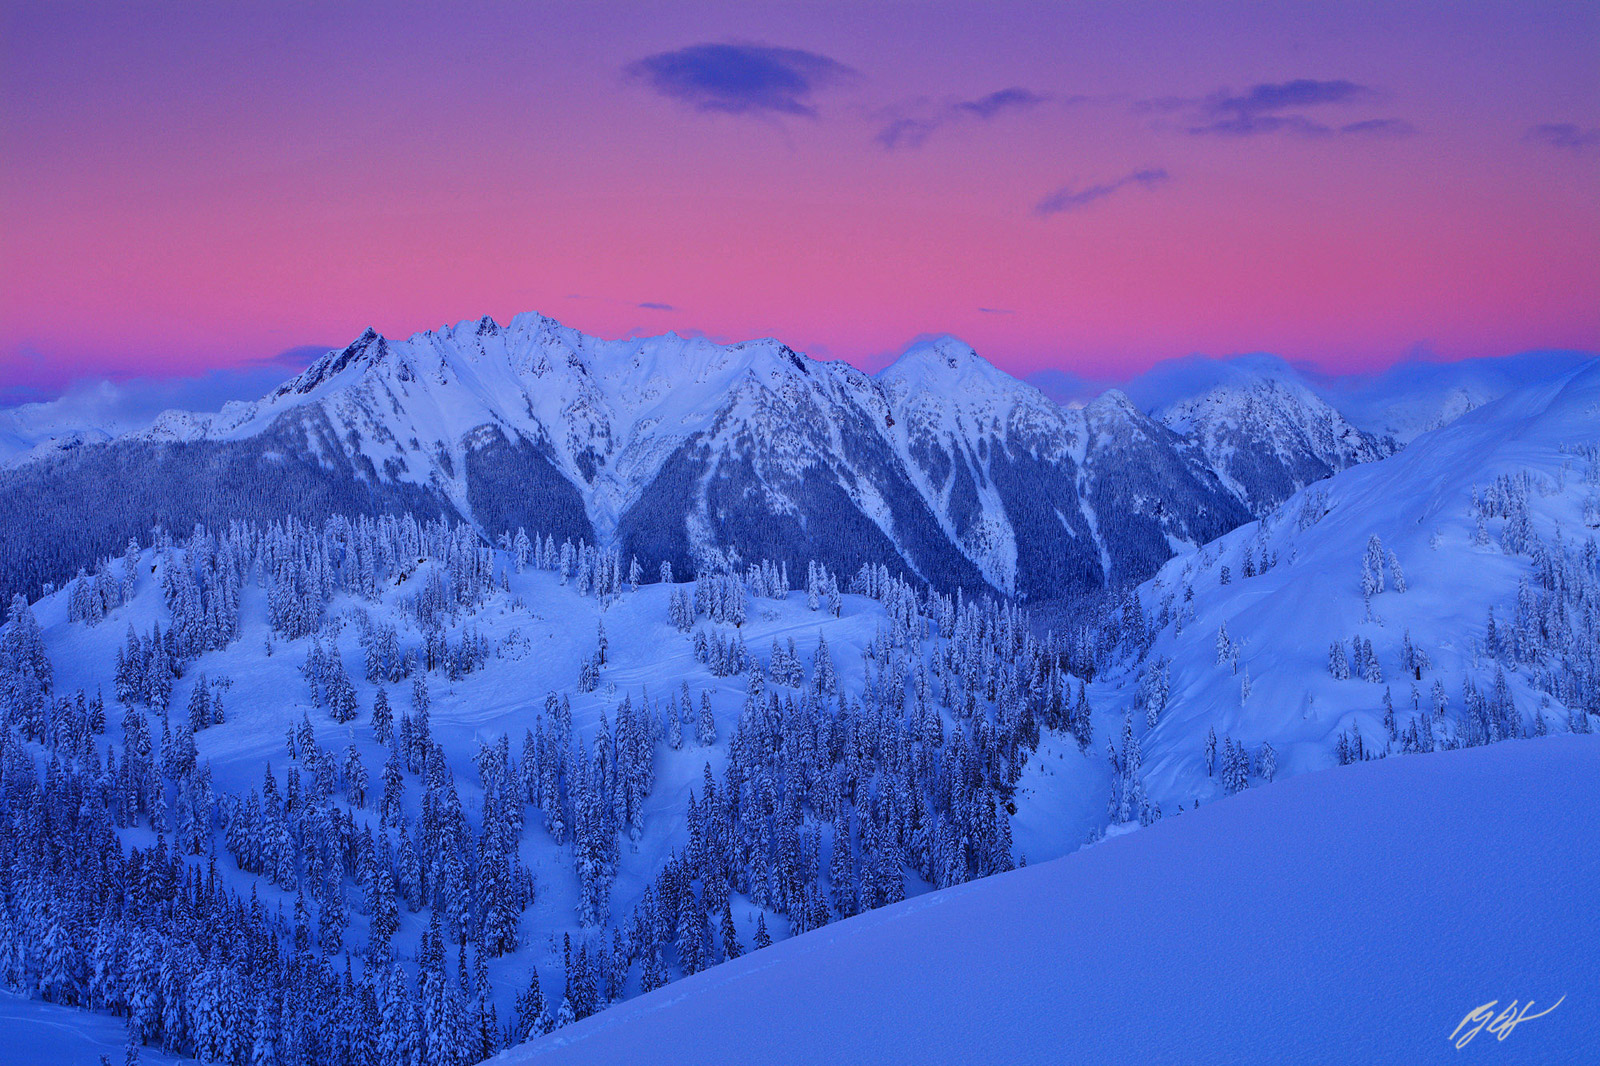 Winter Sunset over the North Cascades from Artist Ridge in the Mt Baker National Recreation Area in Washington